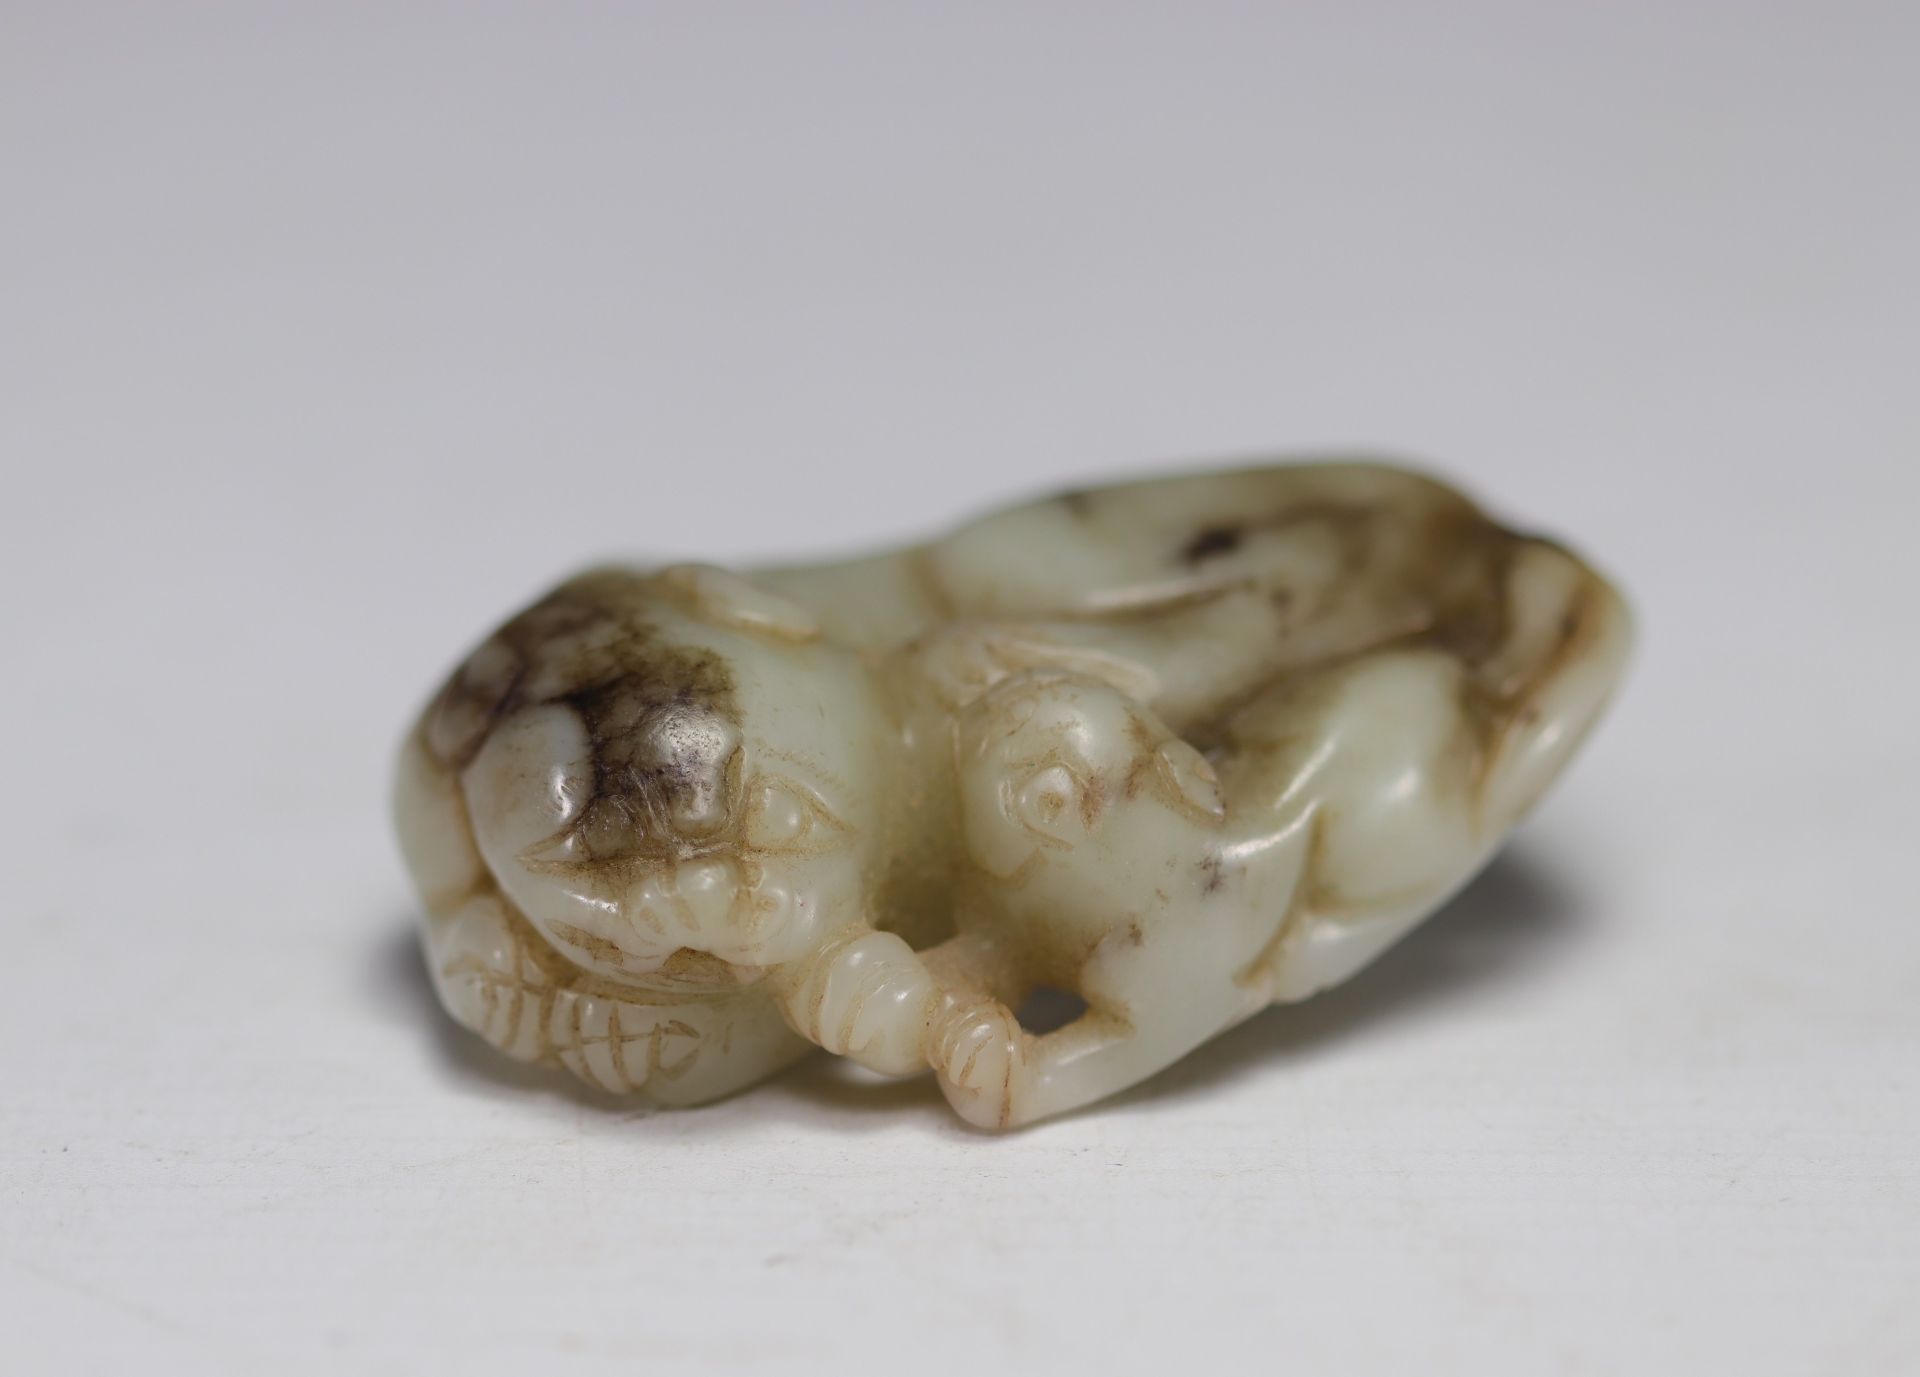 China - Carved jade reclining lions, 18th century. - Image 4 of 9